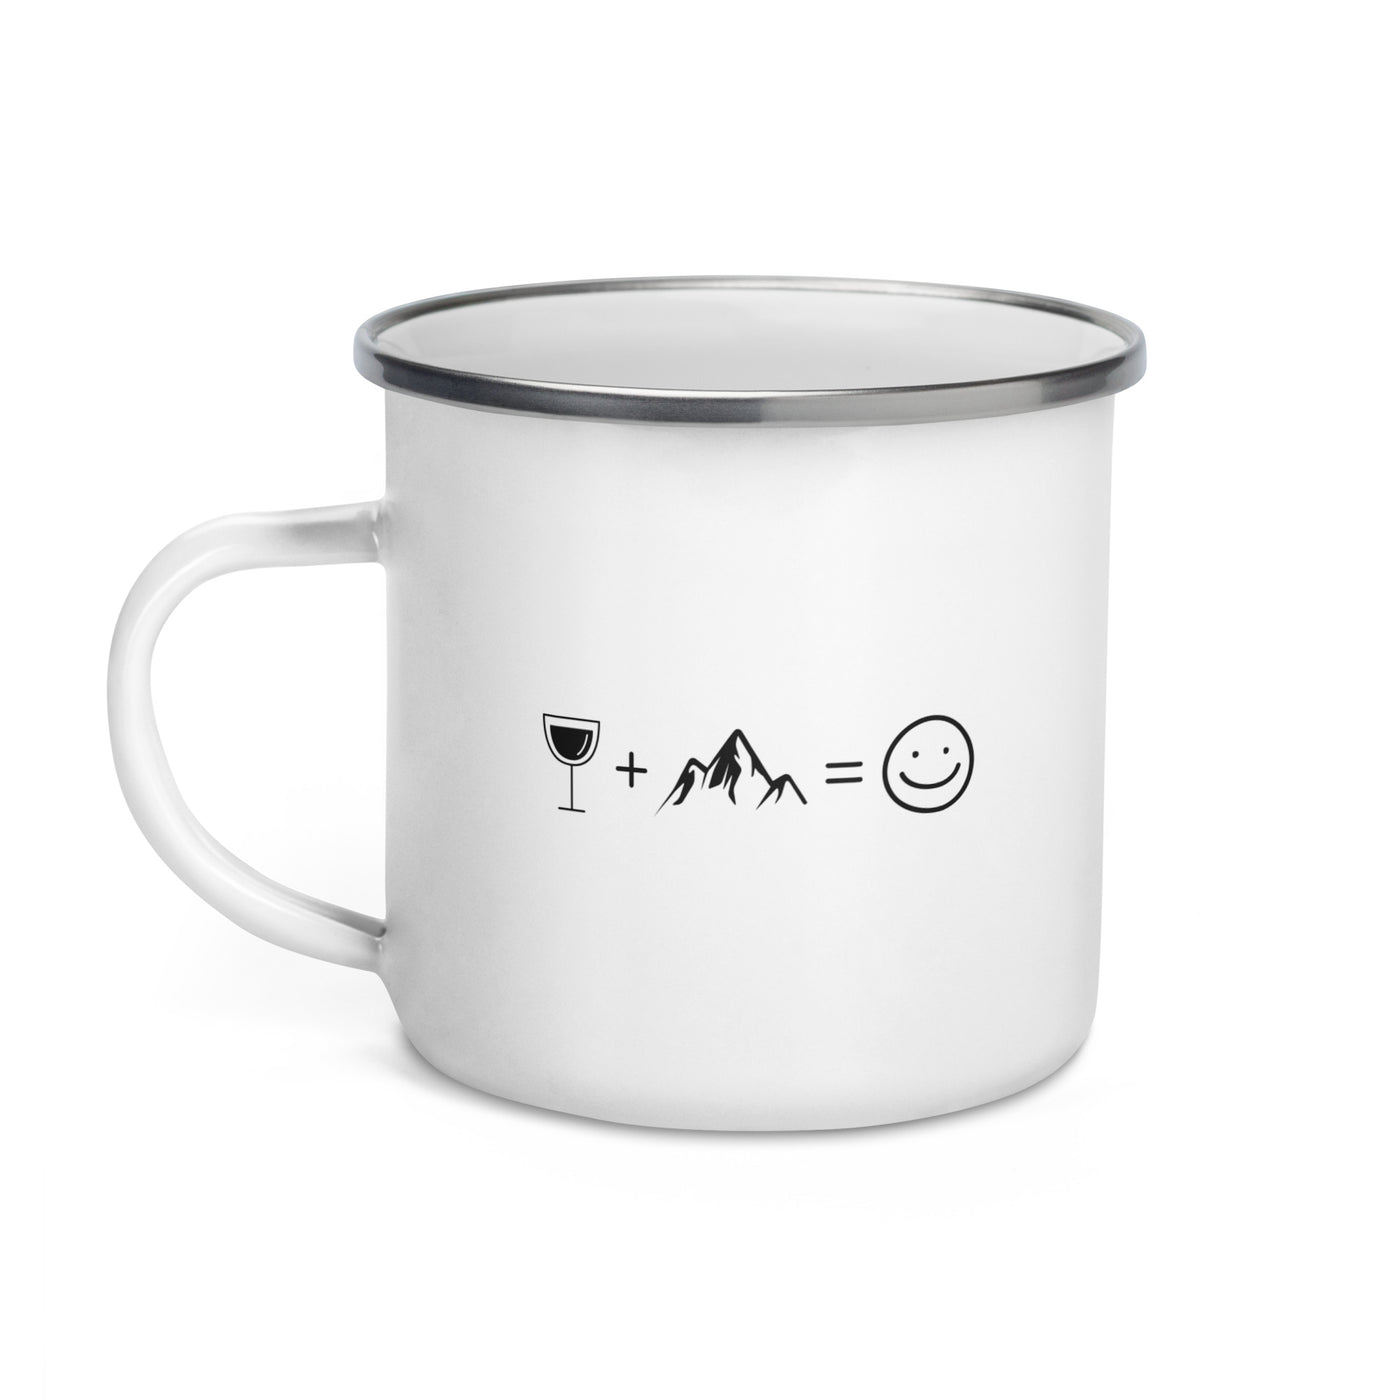 Wine Smile Face And Mountain - Emaille Tasse berge